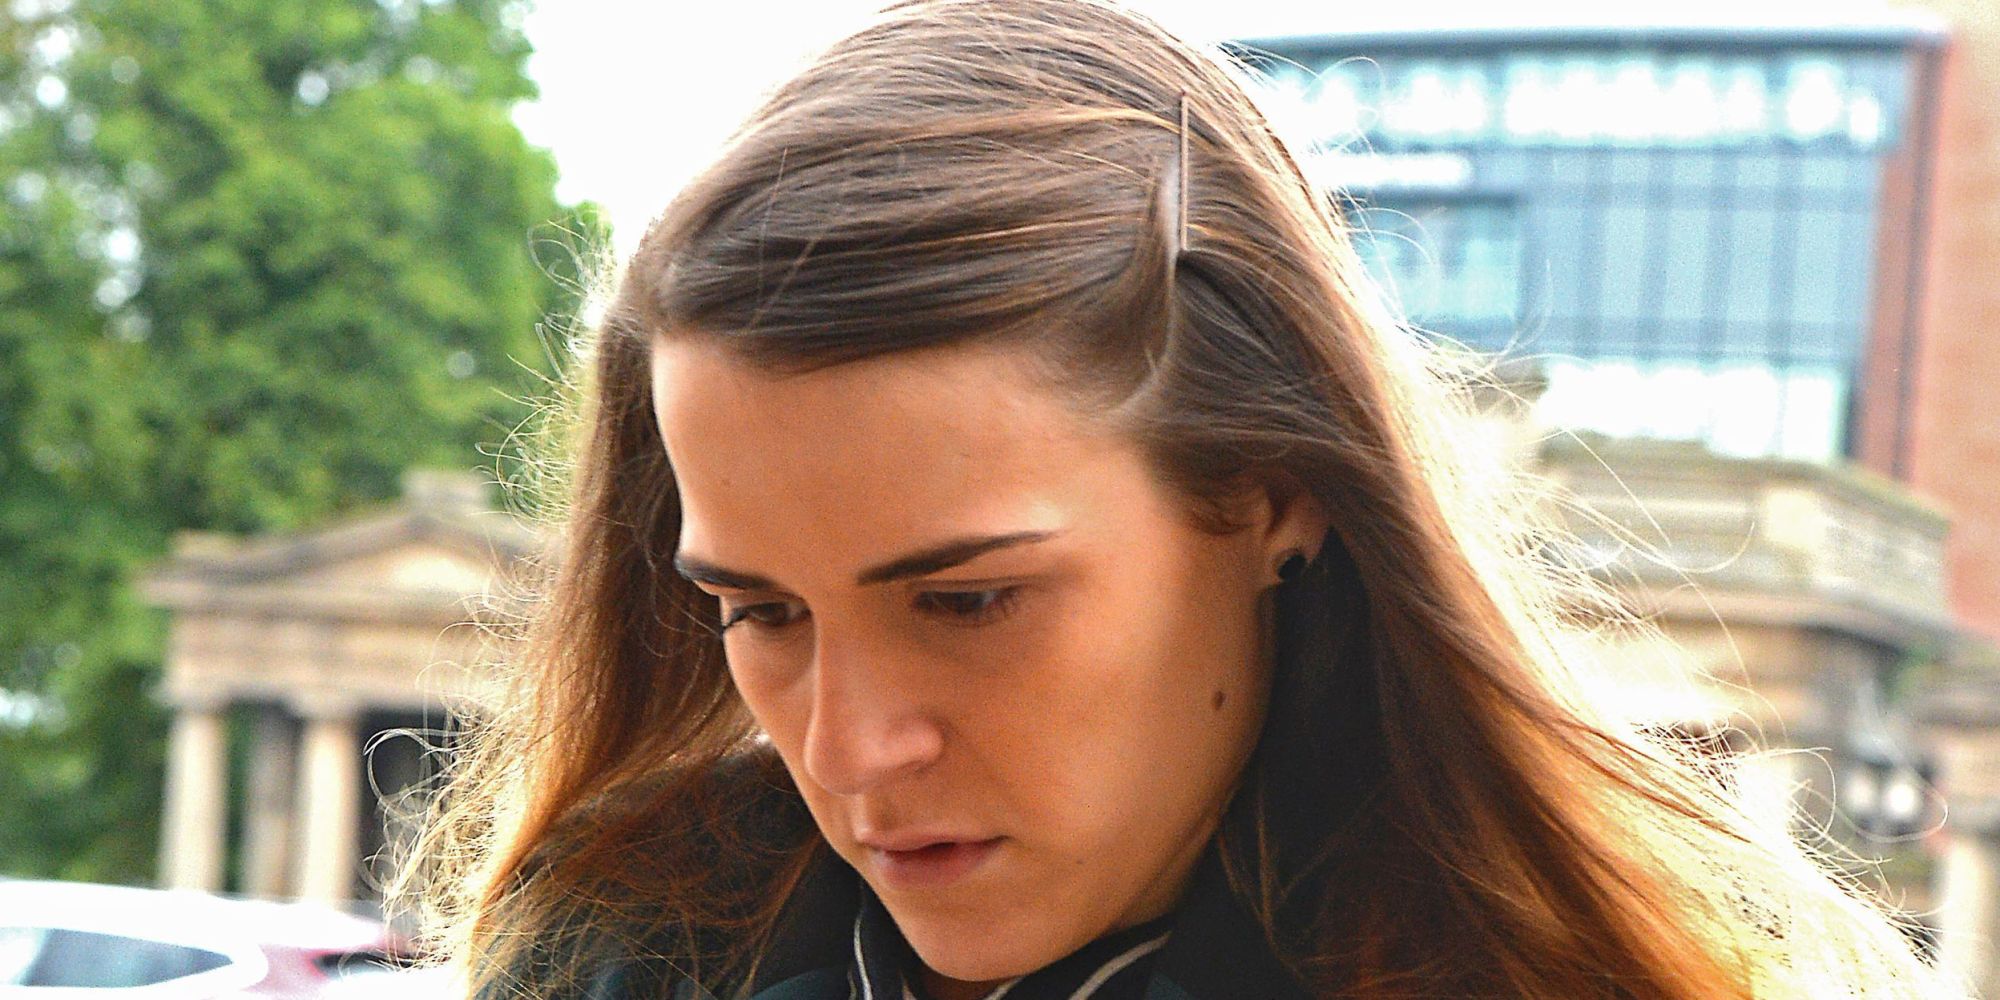 Gayle Newland Woman Who Duped Female Friend Into Having